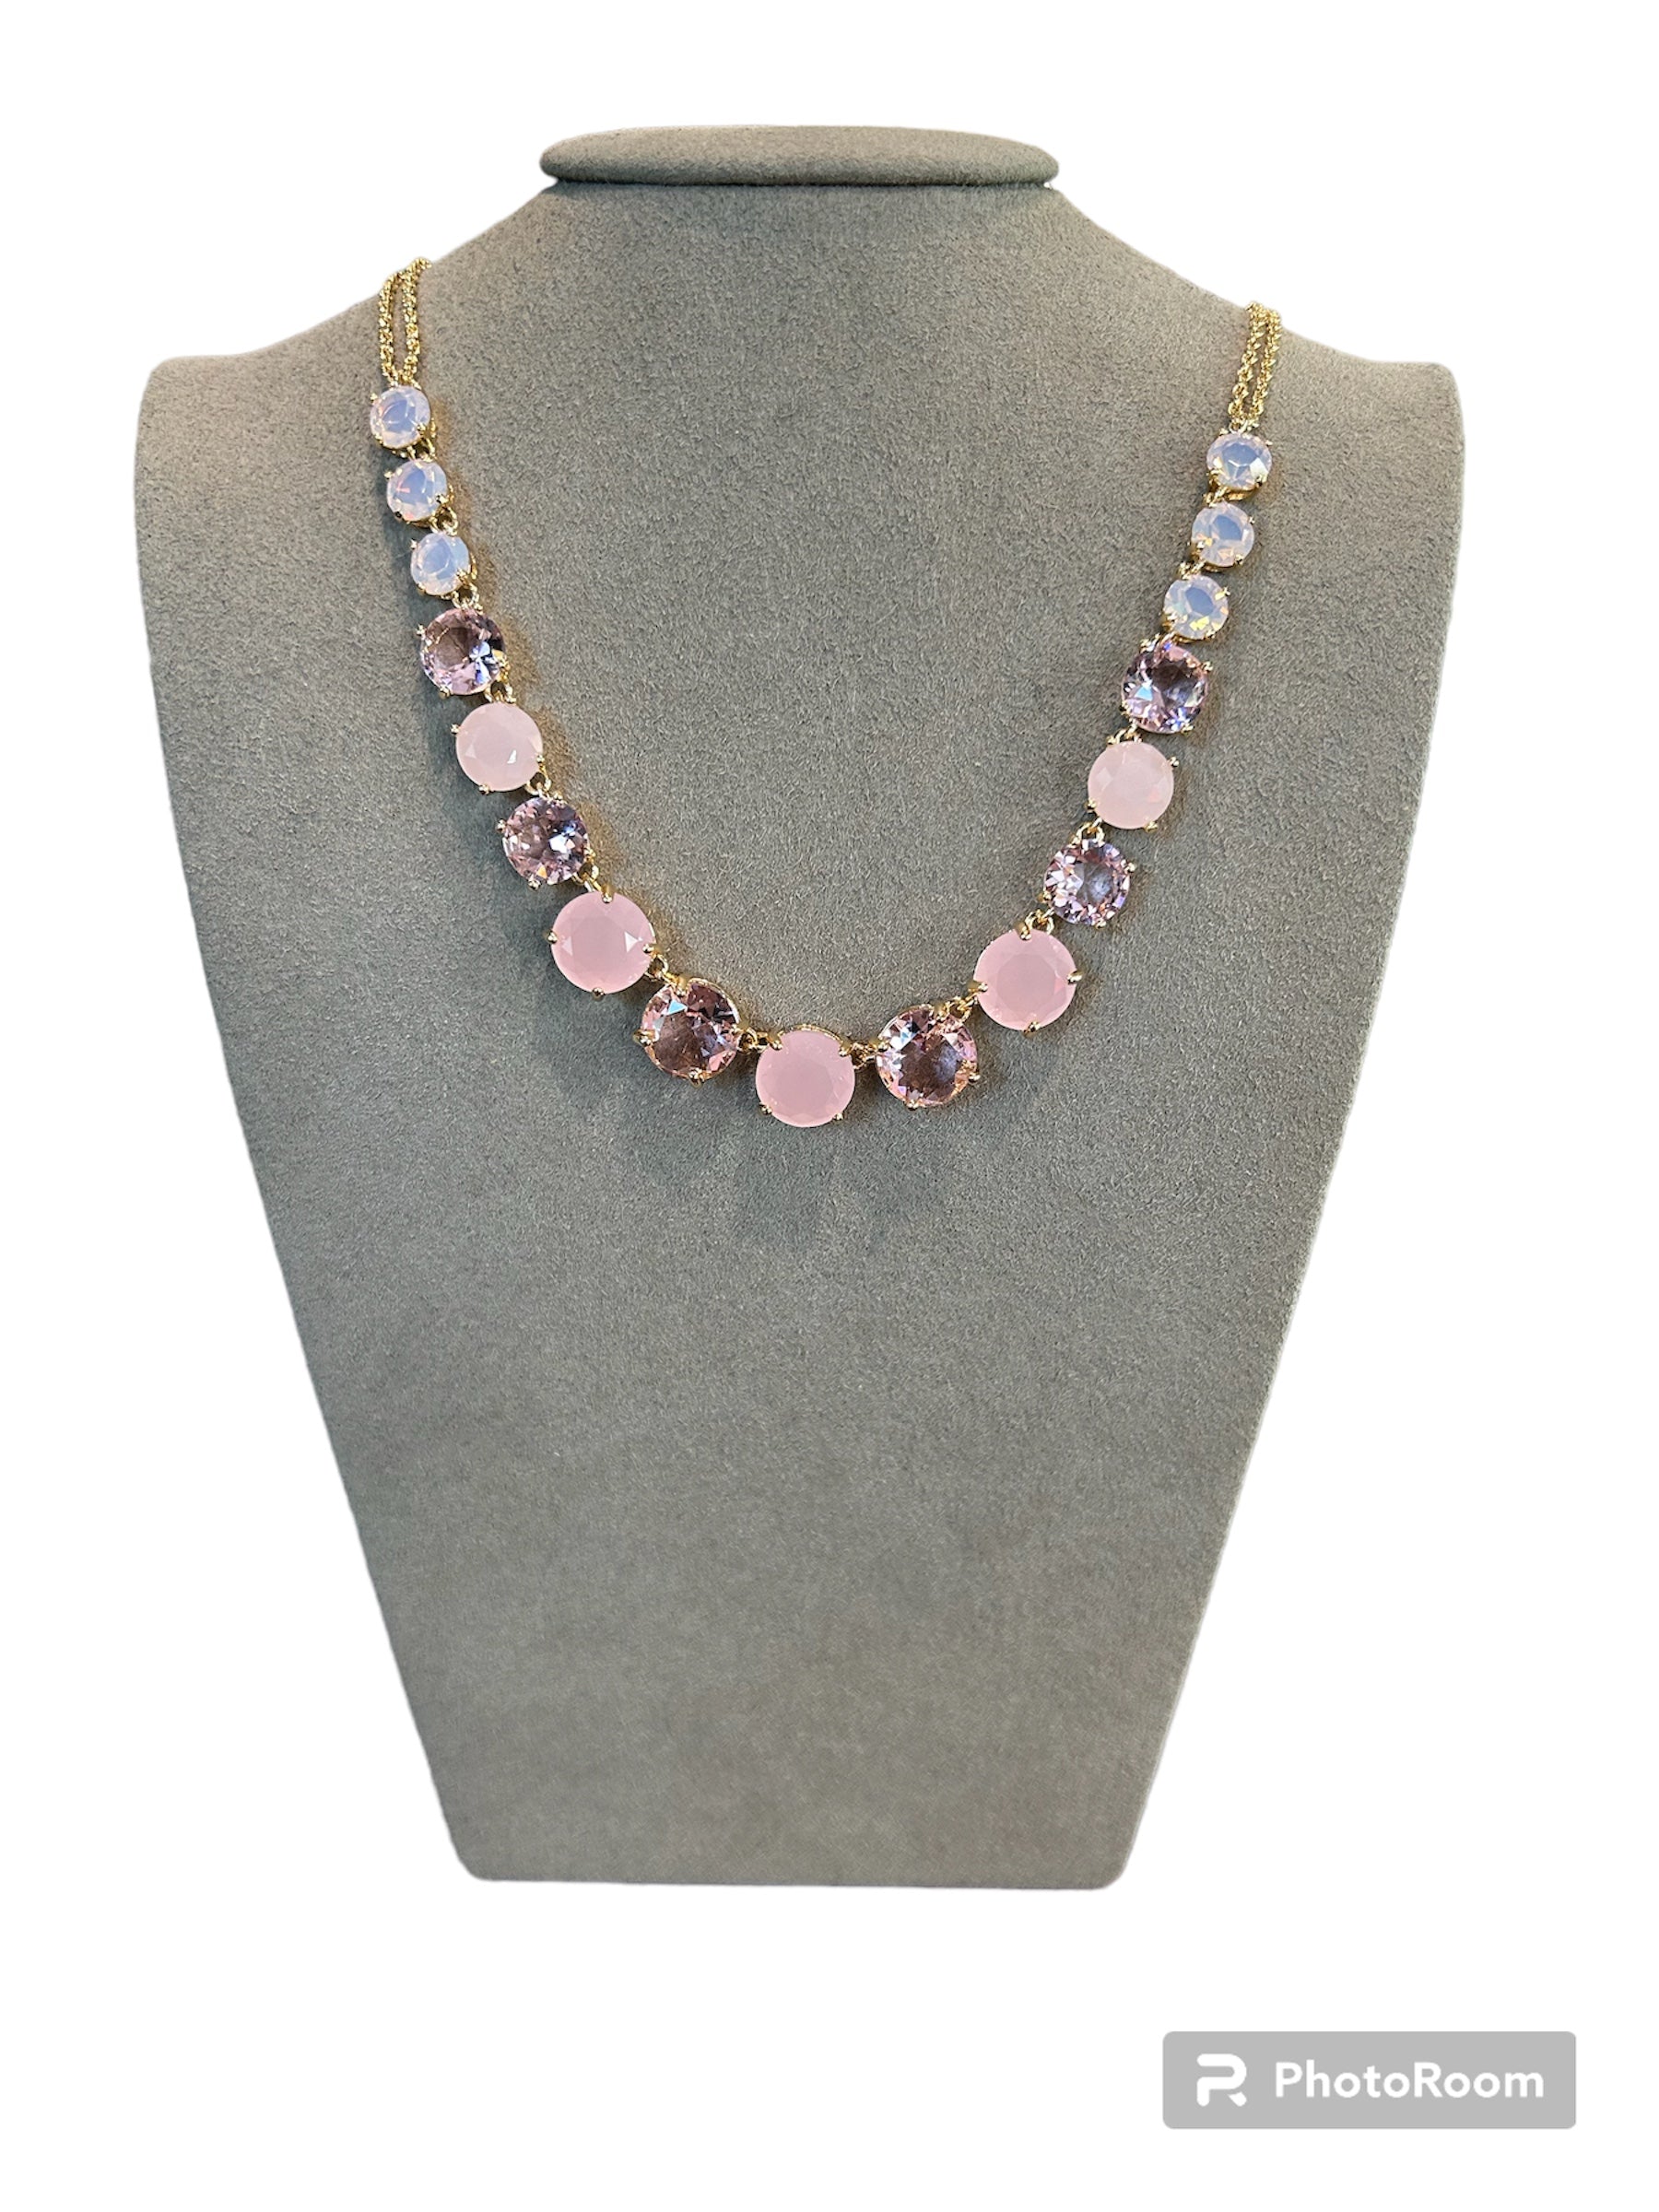 IL Mio Re - Golden bronze necklace with pink stones - ILMIORE CL 021R